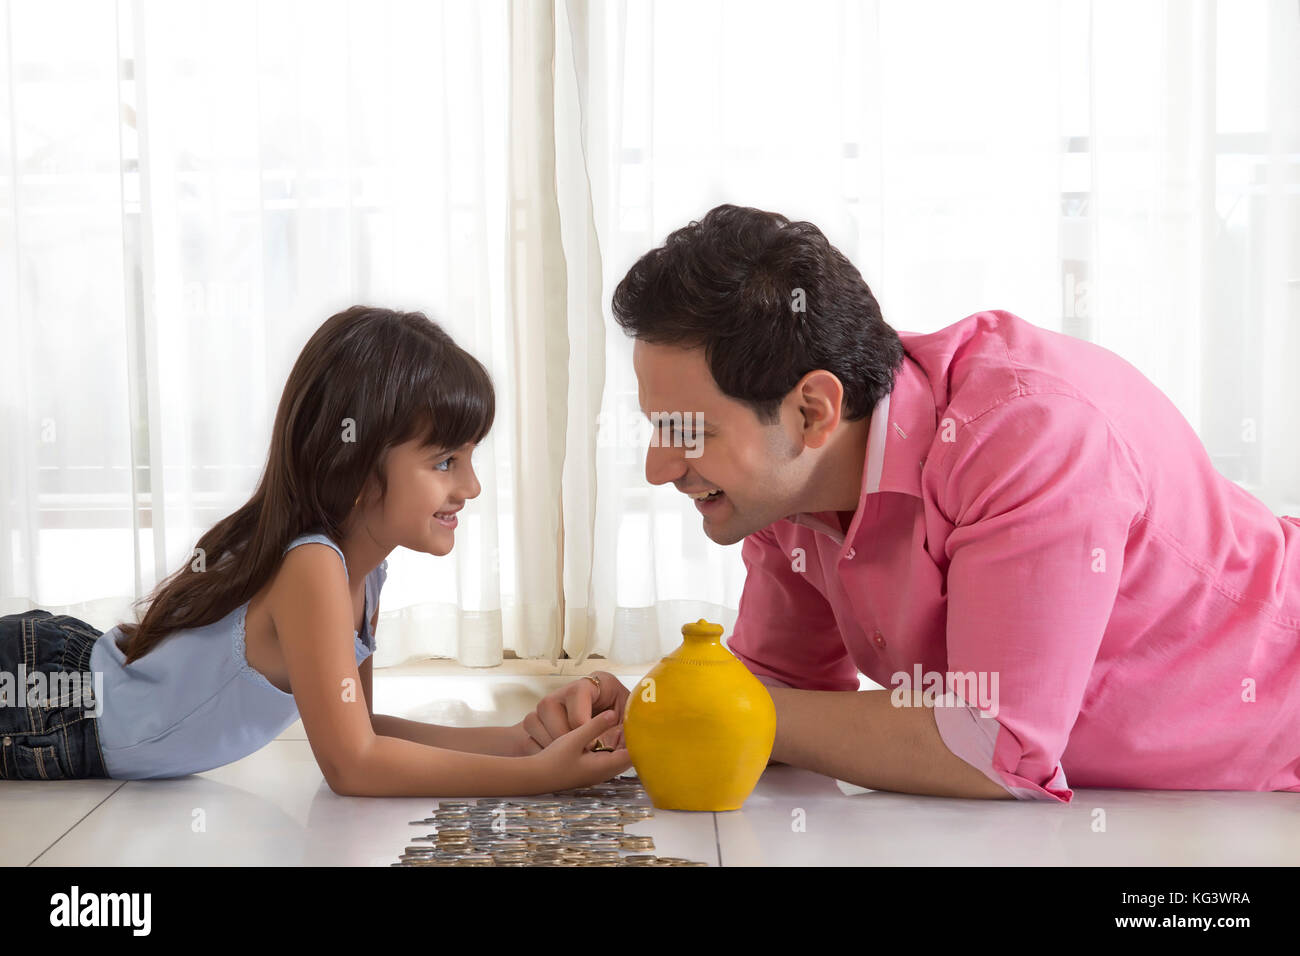 Father and daughter lying on floor with piggy bank counting change Stock Photo